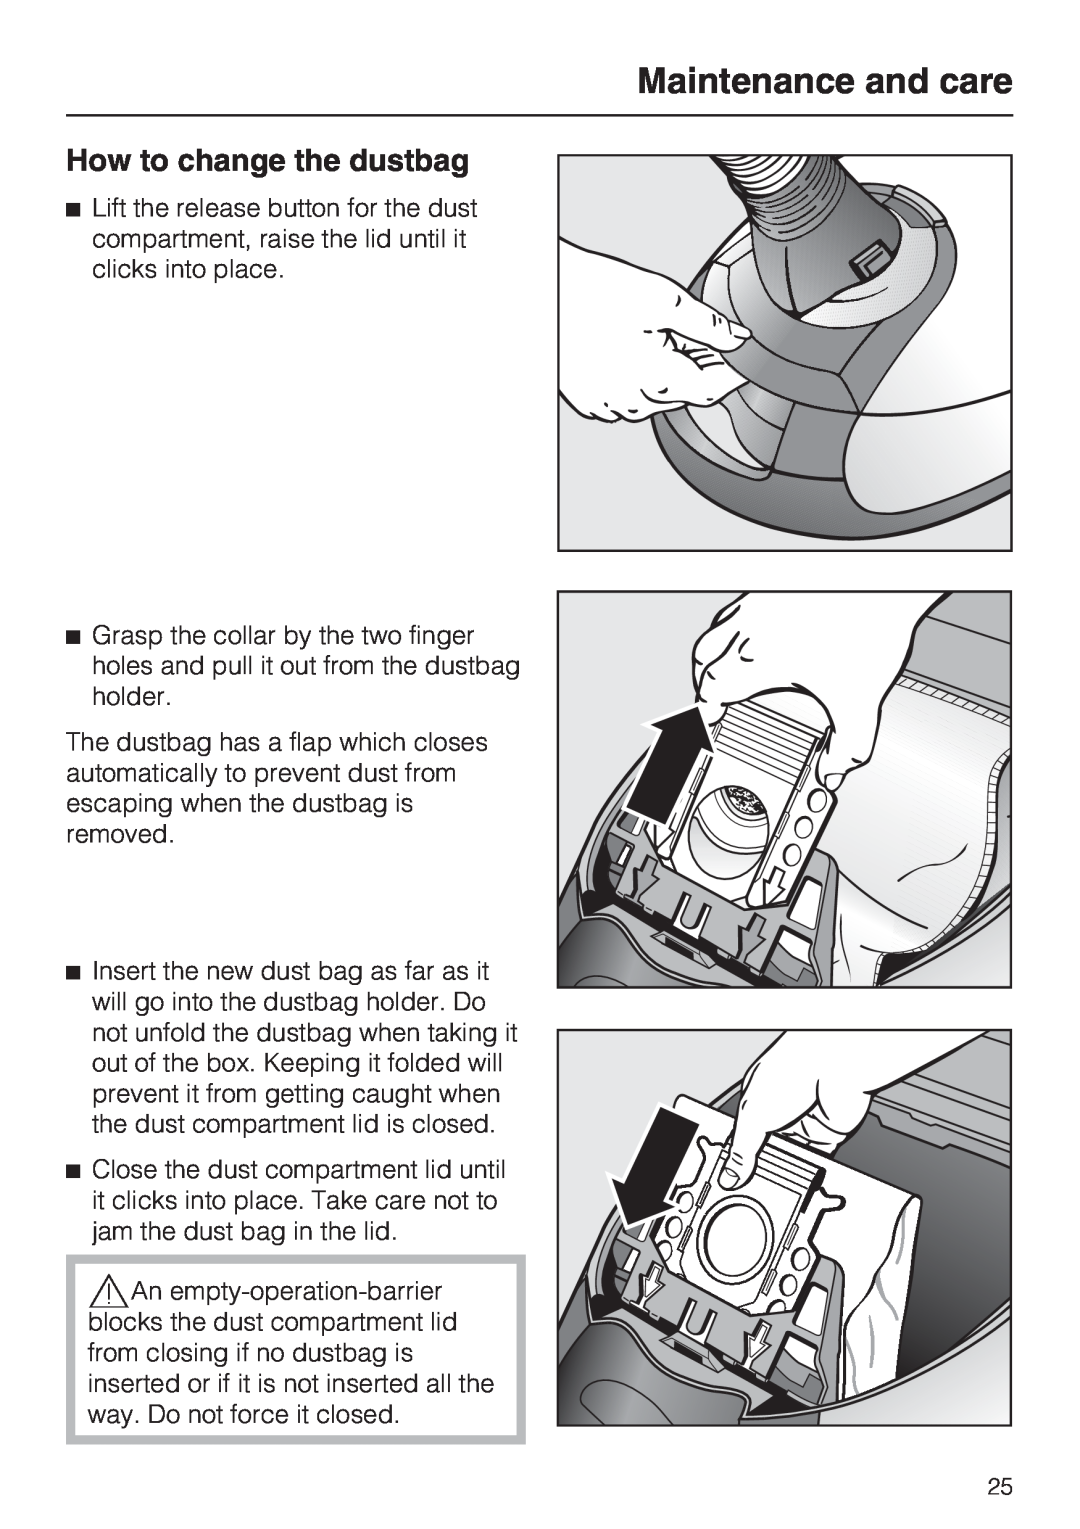 Miele S 5980 operating instructions How to change the dustbag, Maintenance and care 